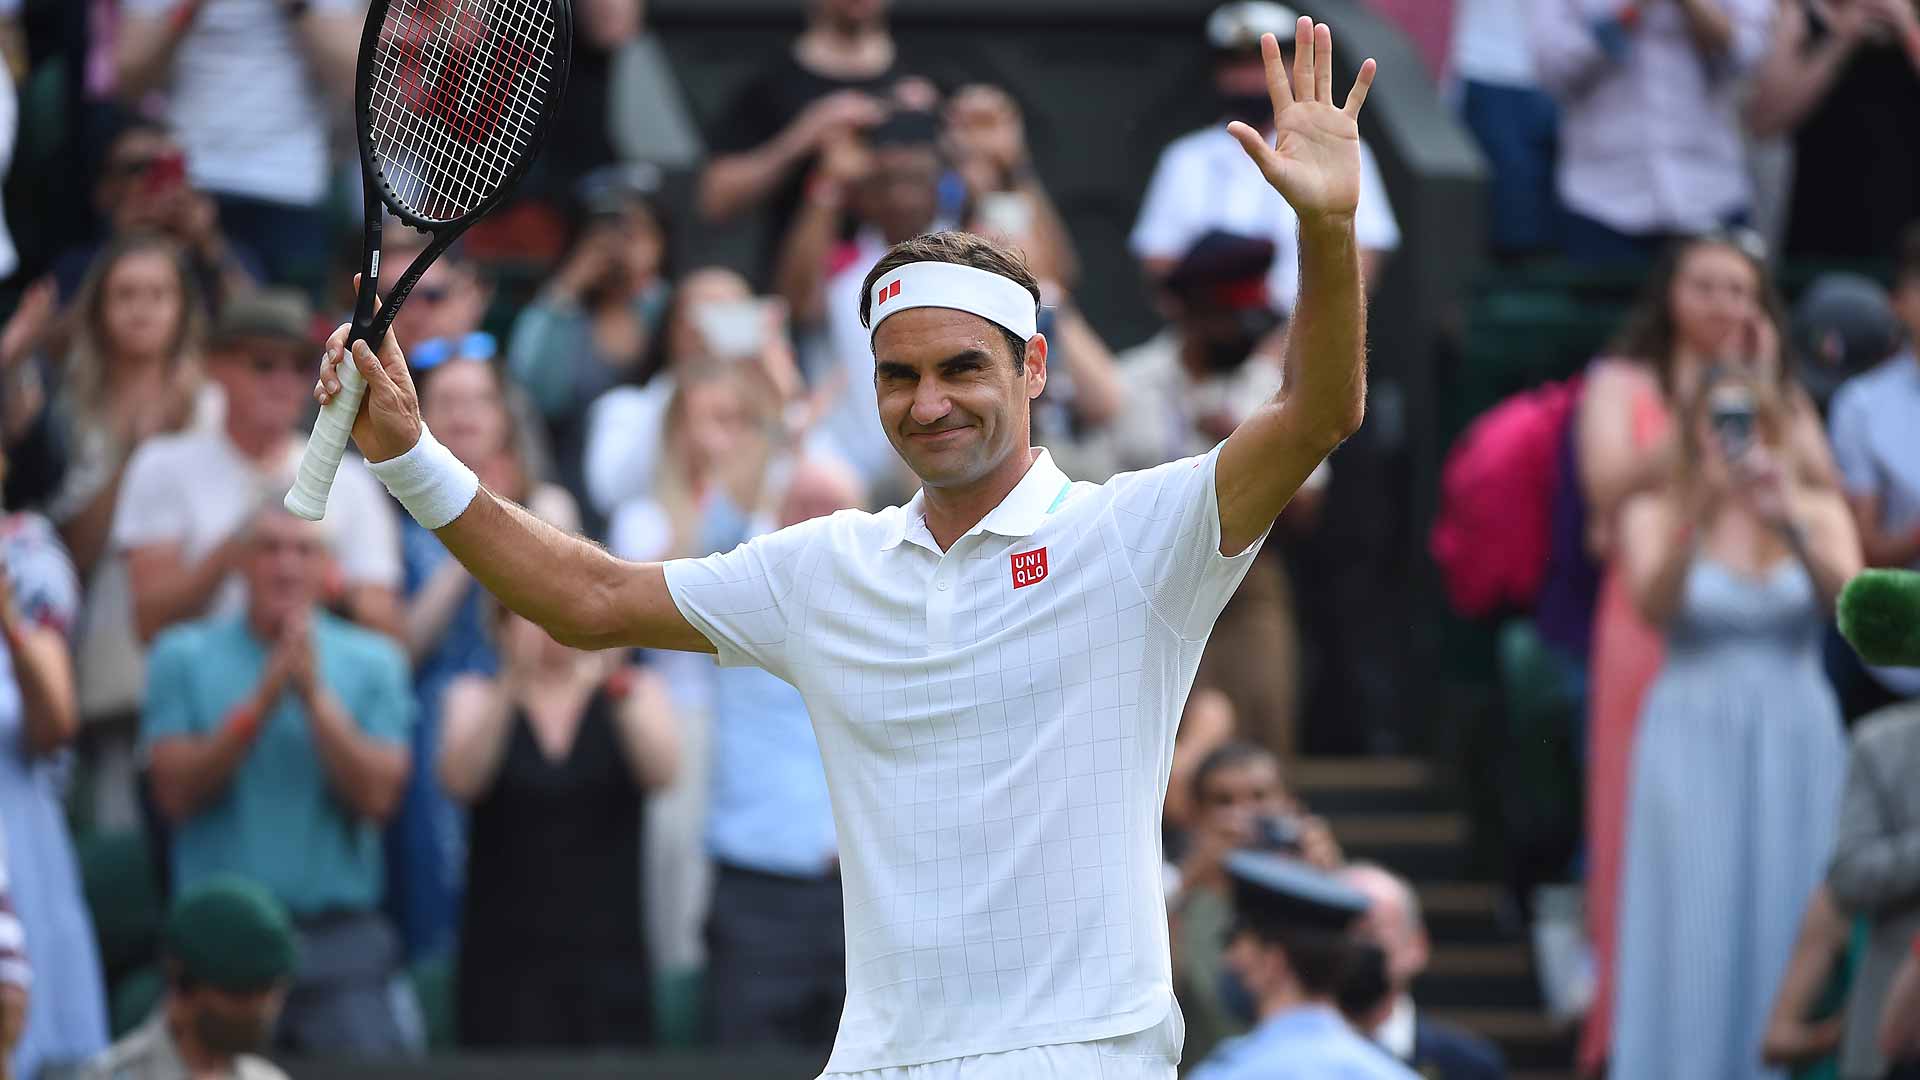 Roger Federer in 2021 celebrating a match win at Wimbledon, where he won the title a record eight times.